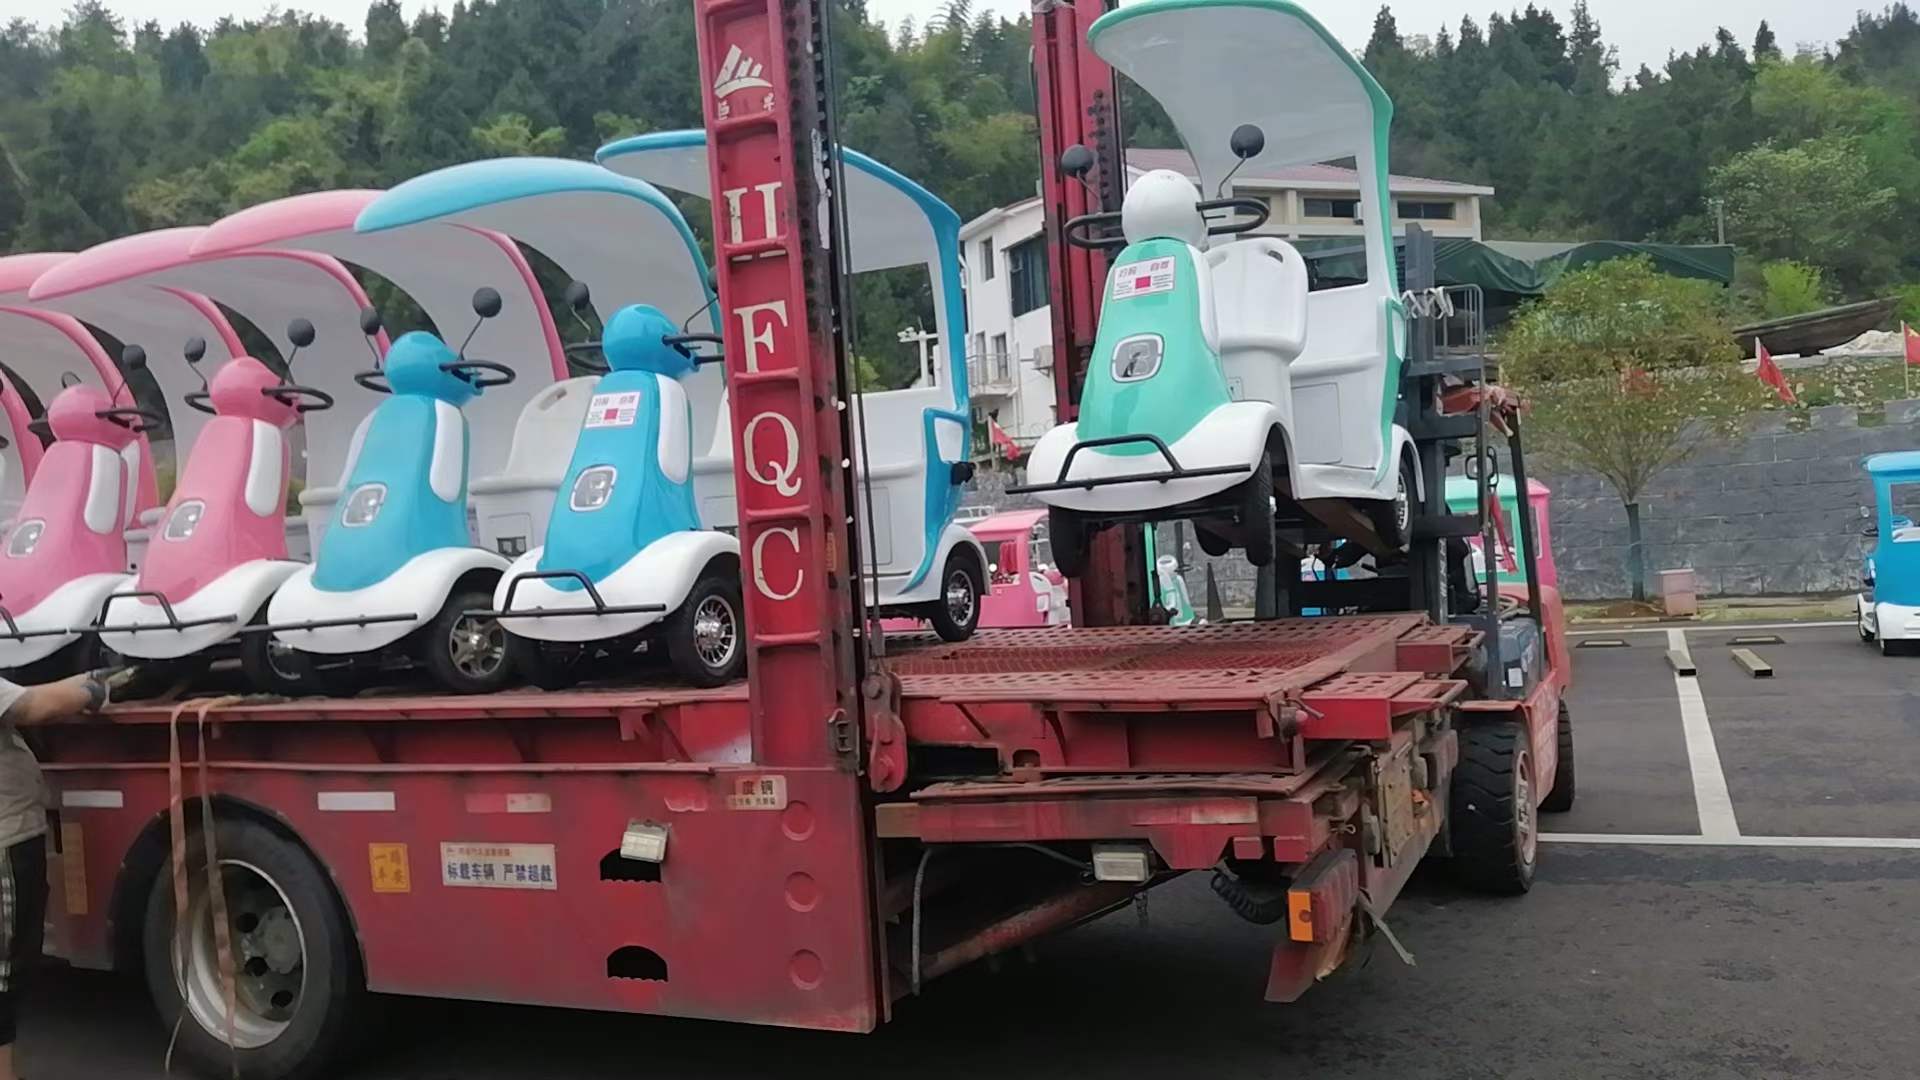 Our 2 seater mobility scooters are loaded in a long truck.